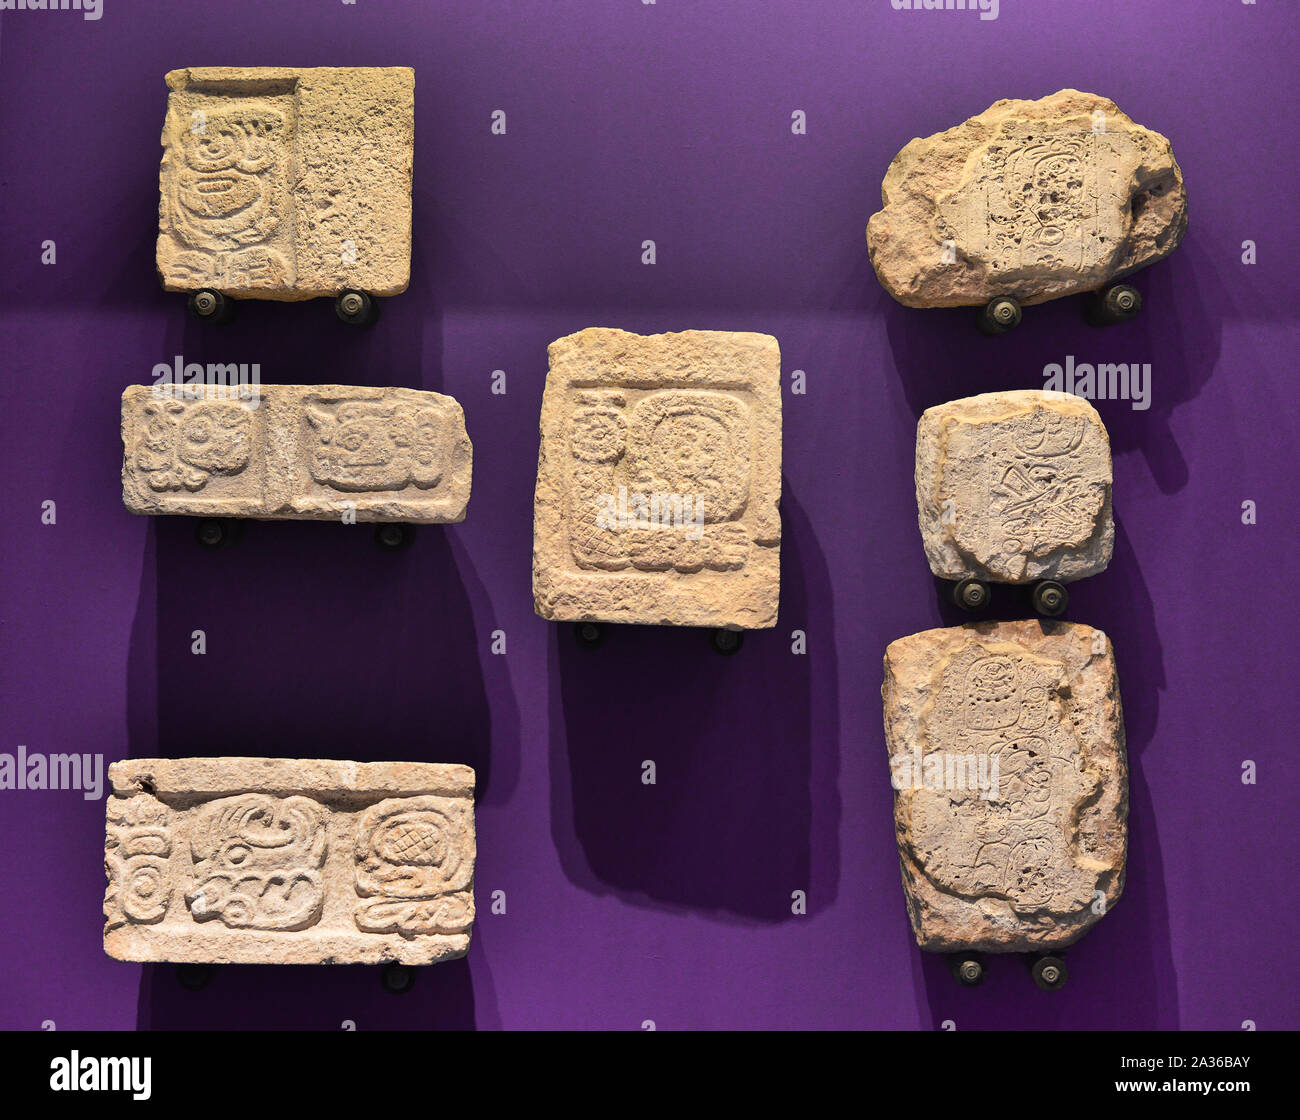 Mayan Glyphs  from the late classic Mayan period. Yucatan and Campeche, Mexico. Stock Photo